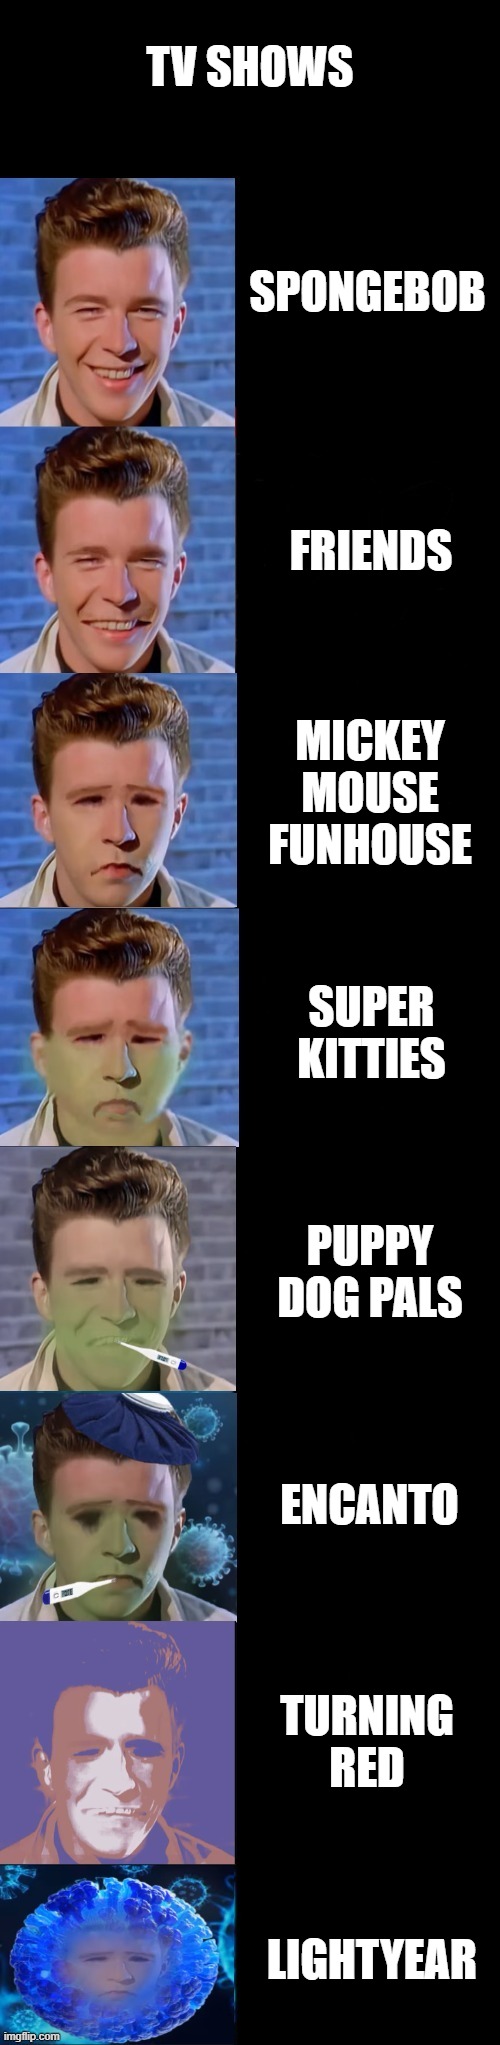 Rick Astley Becoming Sick | TV SHOWS; SPONGEBOB; FRIENDS; MICKEY MOUSE FUNHOUSE; SUPER KITTIES; PUPPY DOG PALS; ENCANTO; TURNING RED; LIGHTYEAR | image tagged in rick astley becoming sick | made w/ Imgflip meme maker